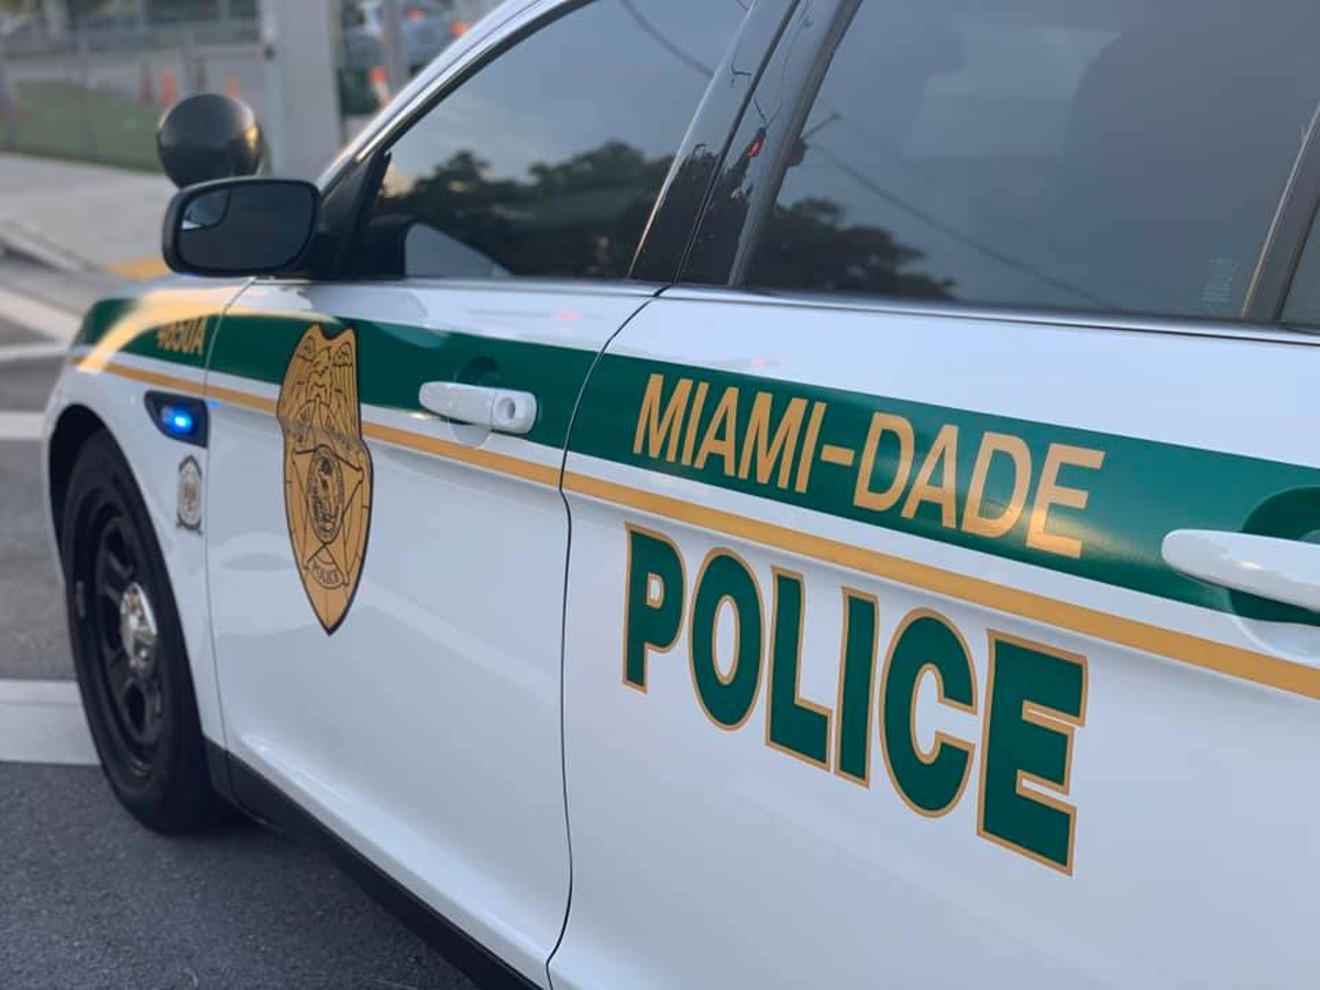 Miami-Dade Police officer Anthony Jimenez, a member of a unit called in to serve high-risk warrants, has been cleared in his third fatal shooting since 2018.